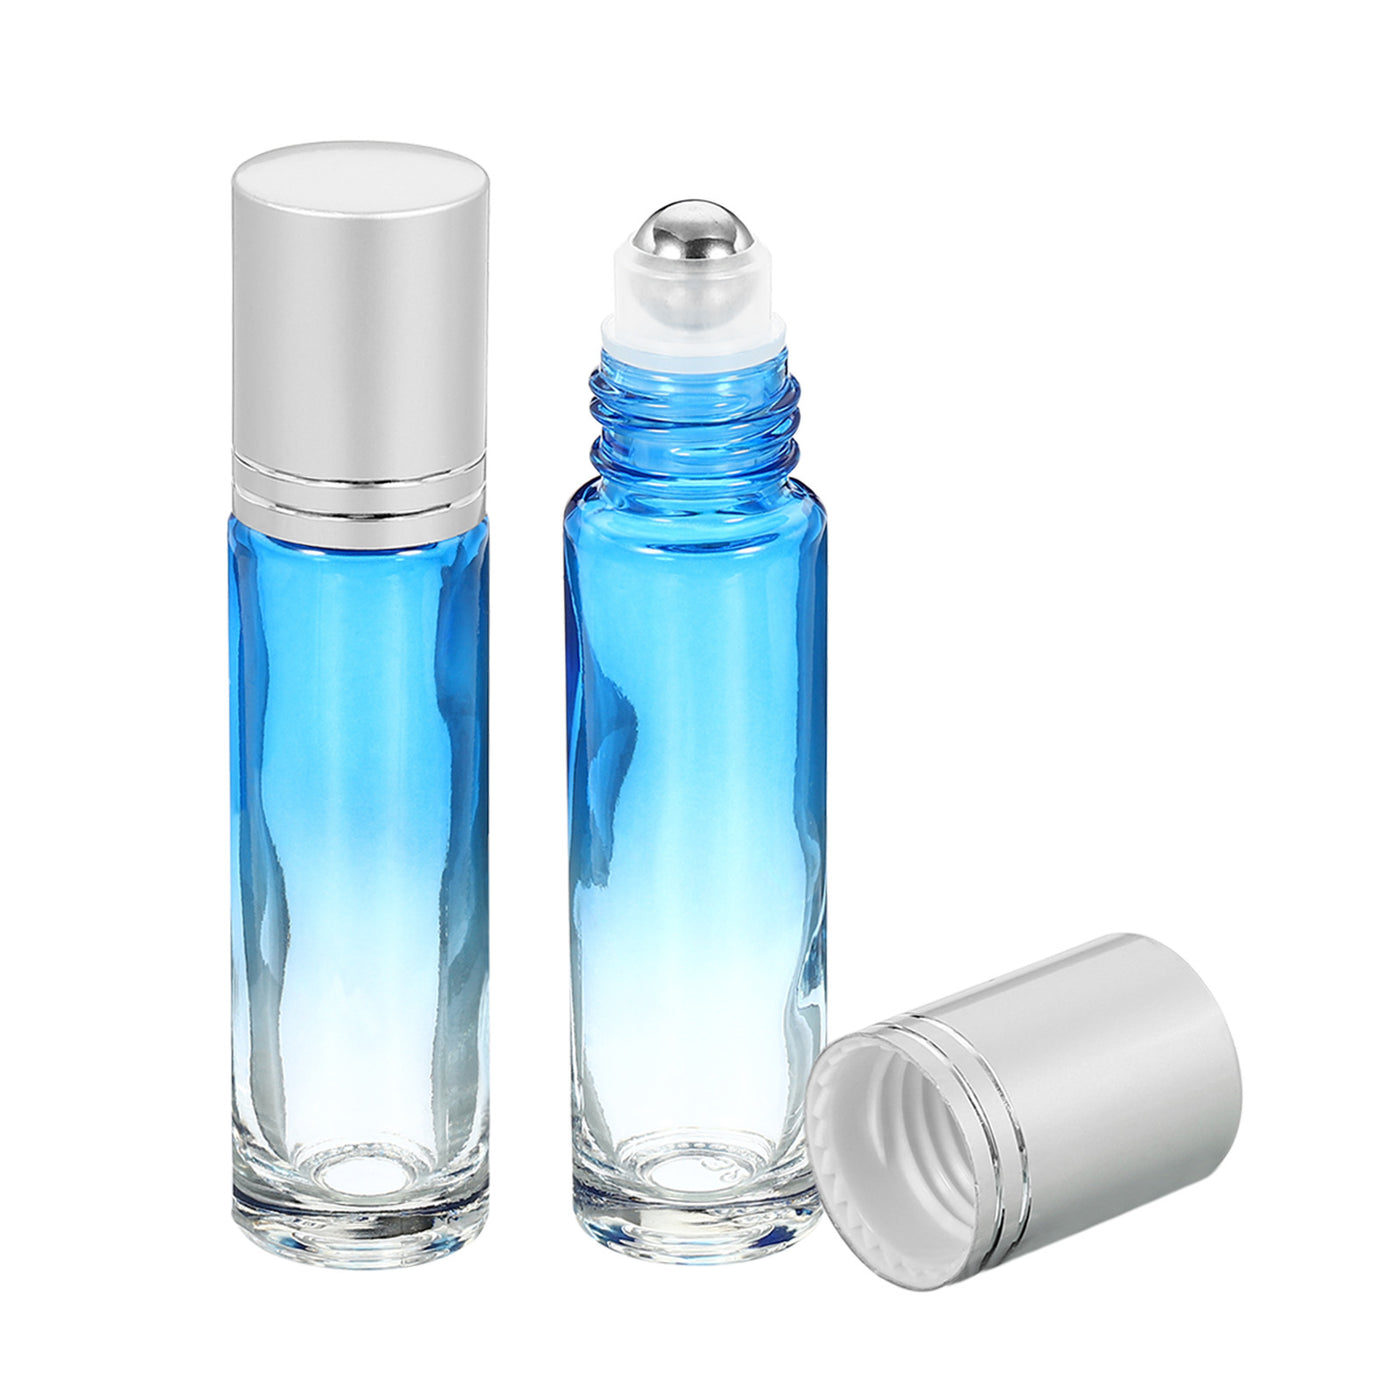 Harfington 10mL Roller Bottles, 2 Pack Glass Essential Oil Roller Balls with Silver Cover Cap Refillable Containers, Blue